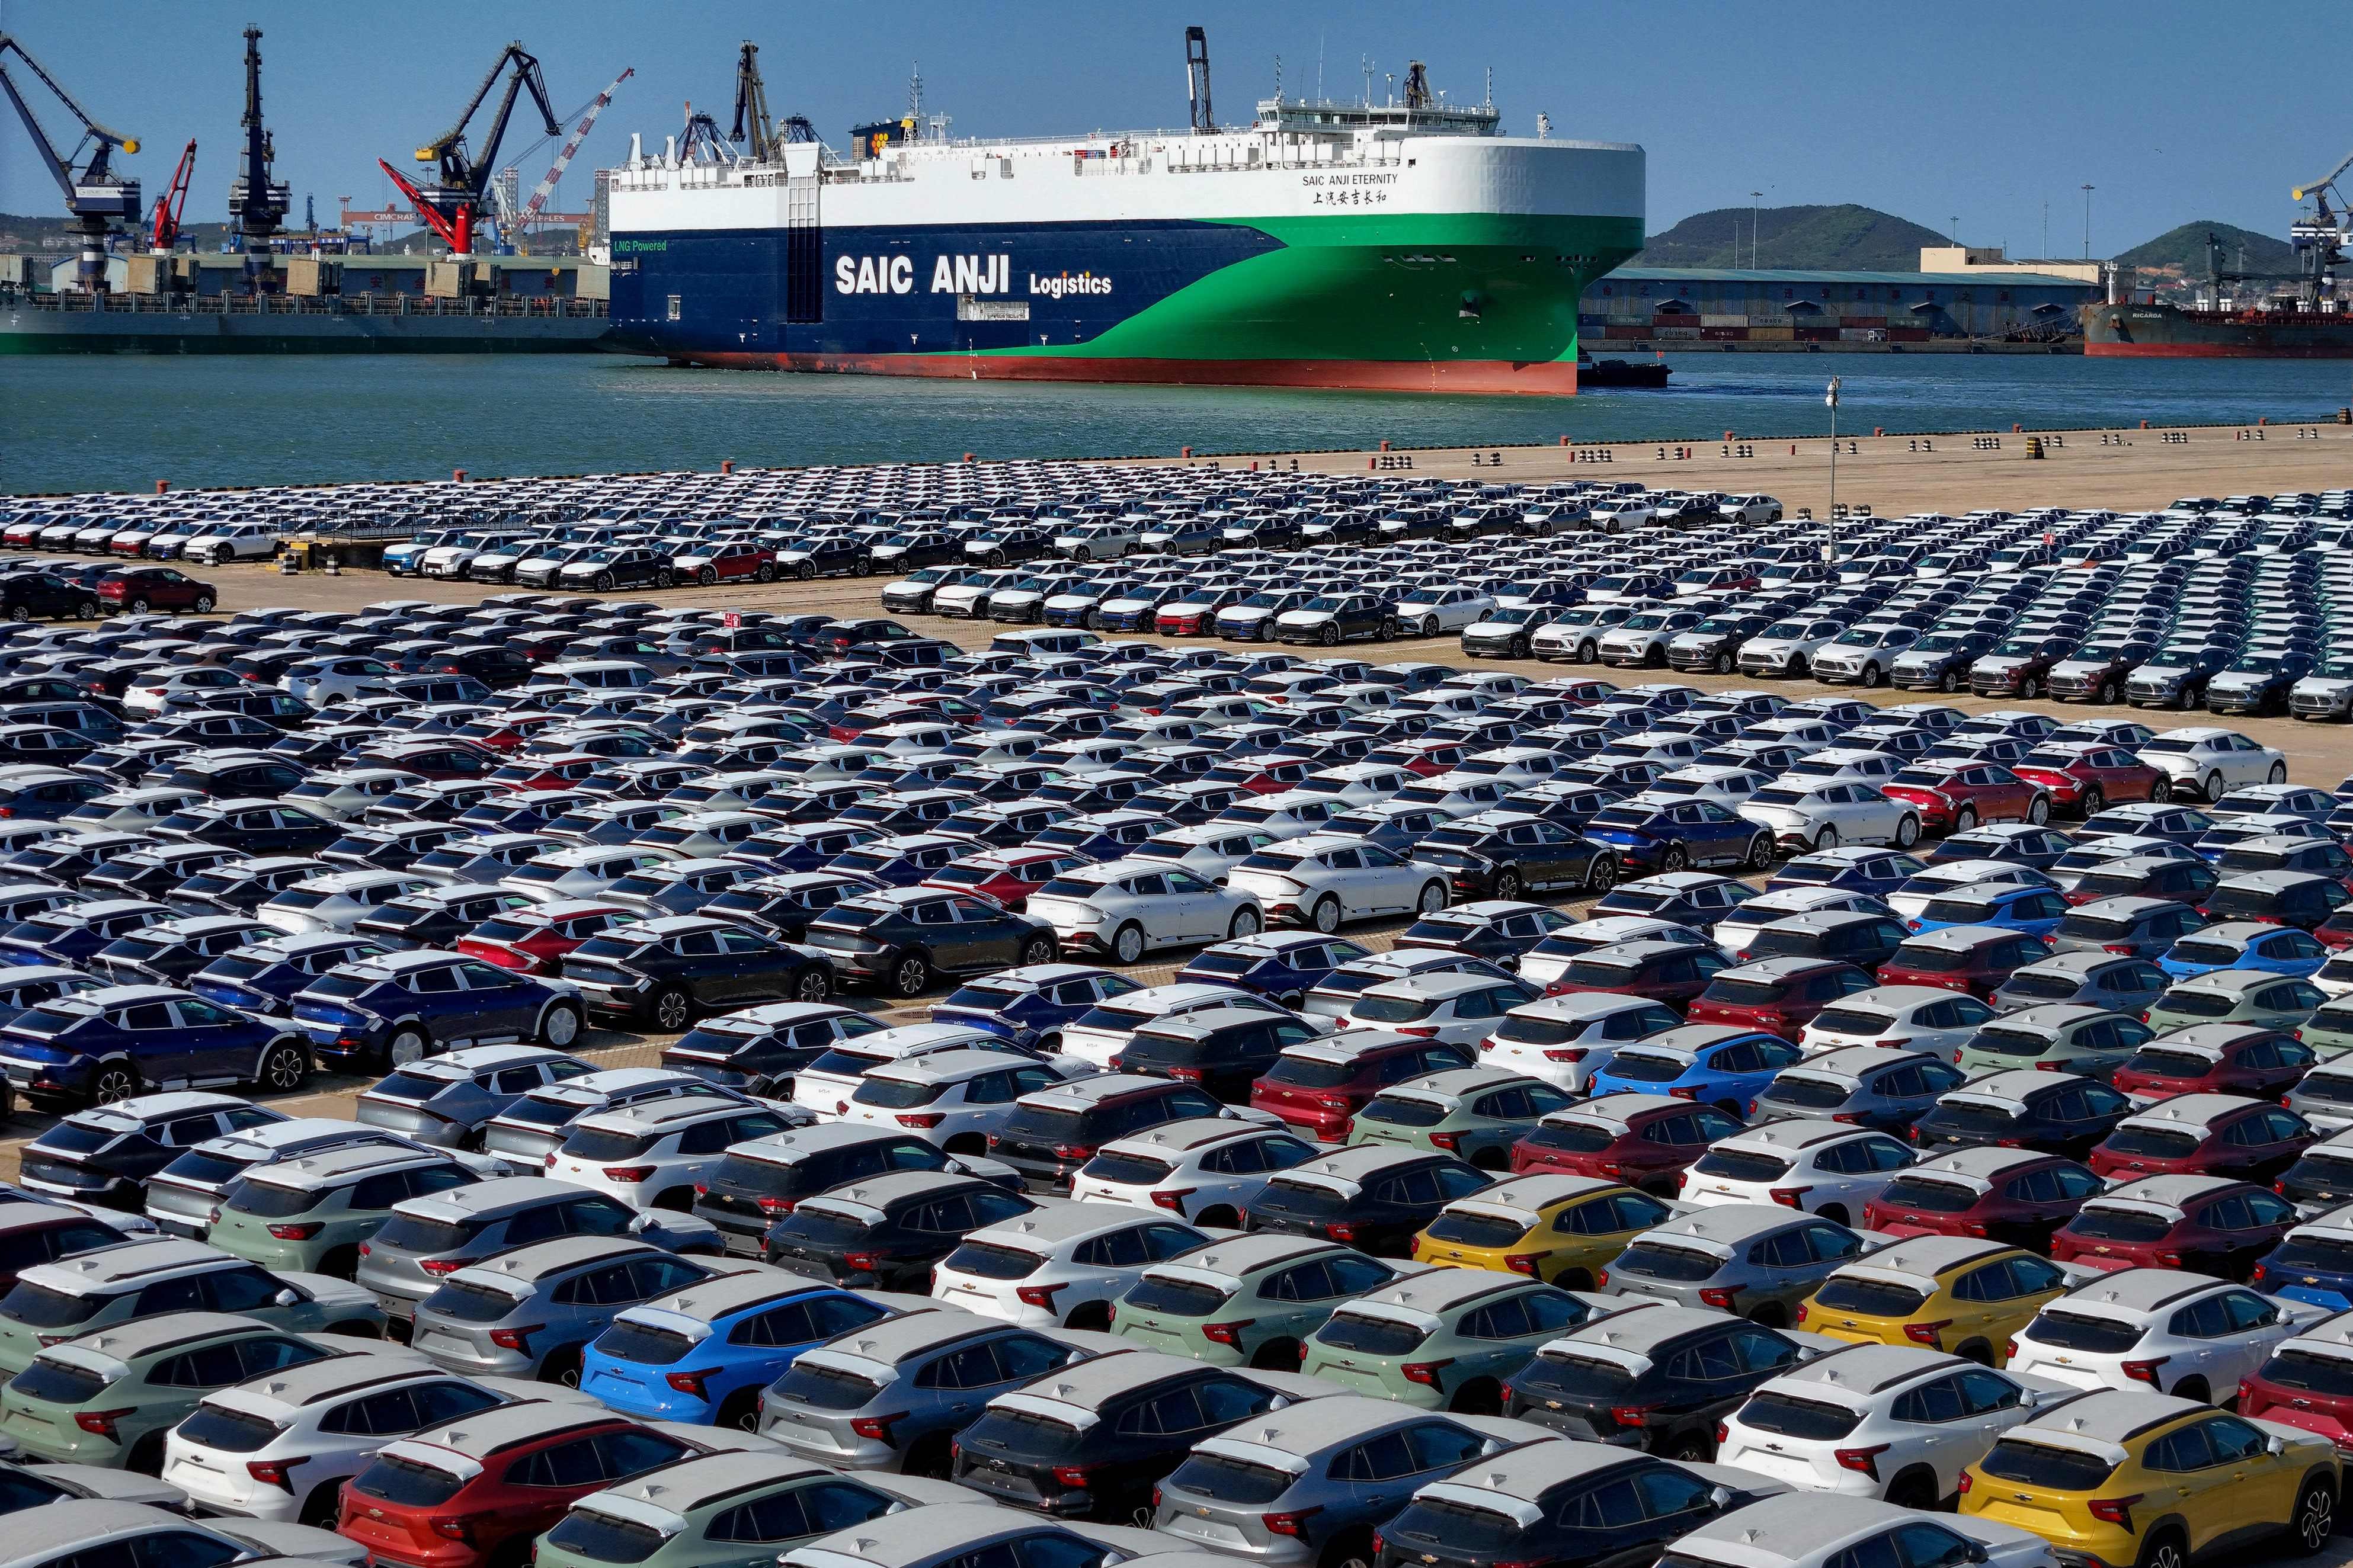 Cars for export wait to be loaded on the SAIC Anji Eternity, a domestically manufactured vessel intended to export Chinese automobiles, at Yantai port in eastern China’s Shandong province. Photo: AFP